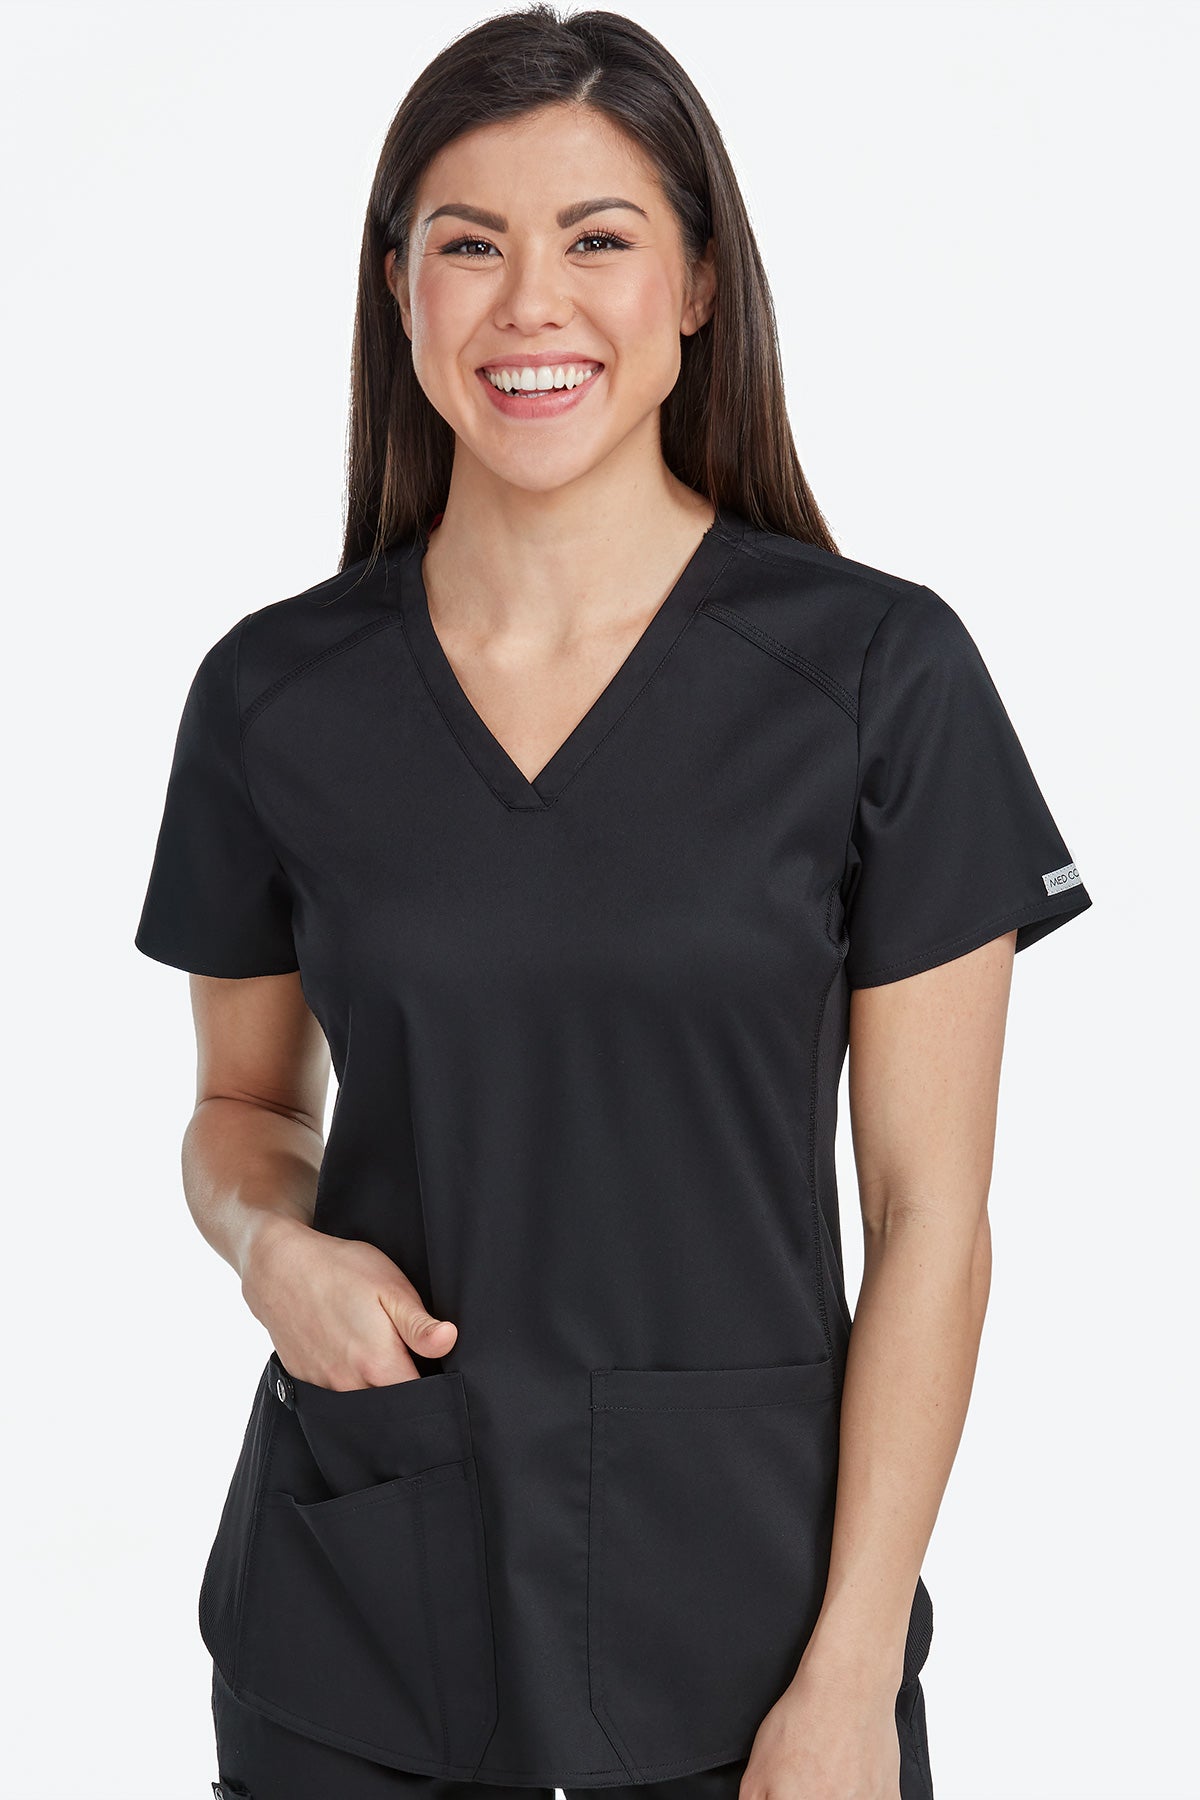 Med Couture Scrub Top Touch Shirttail V-Neck in Black at Parker's Clothing and Shoes.